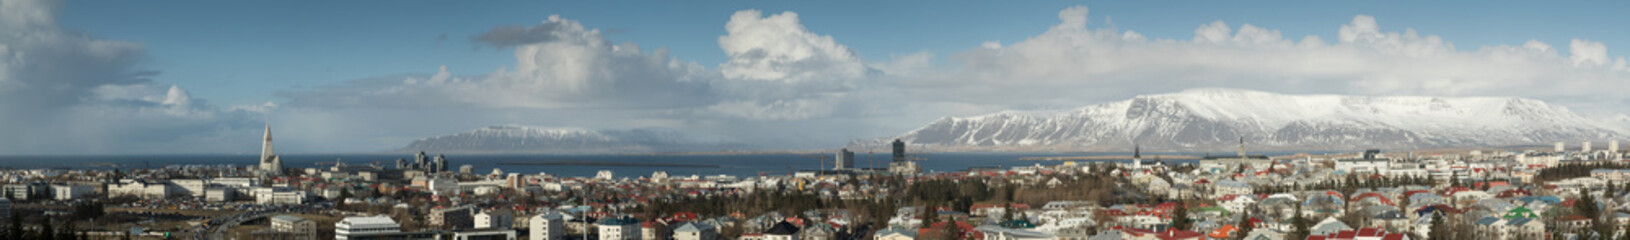 Panorama of Reykjavik skyline showing Hallgrimskirkja church cathedral and the mountains in the...